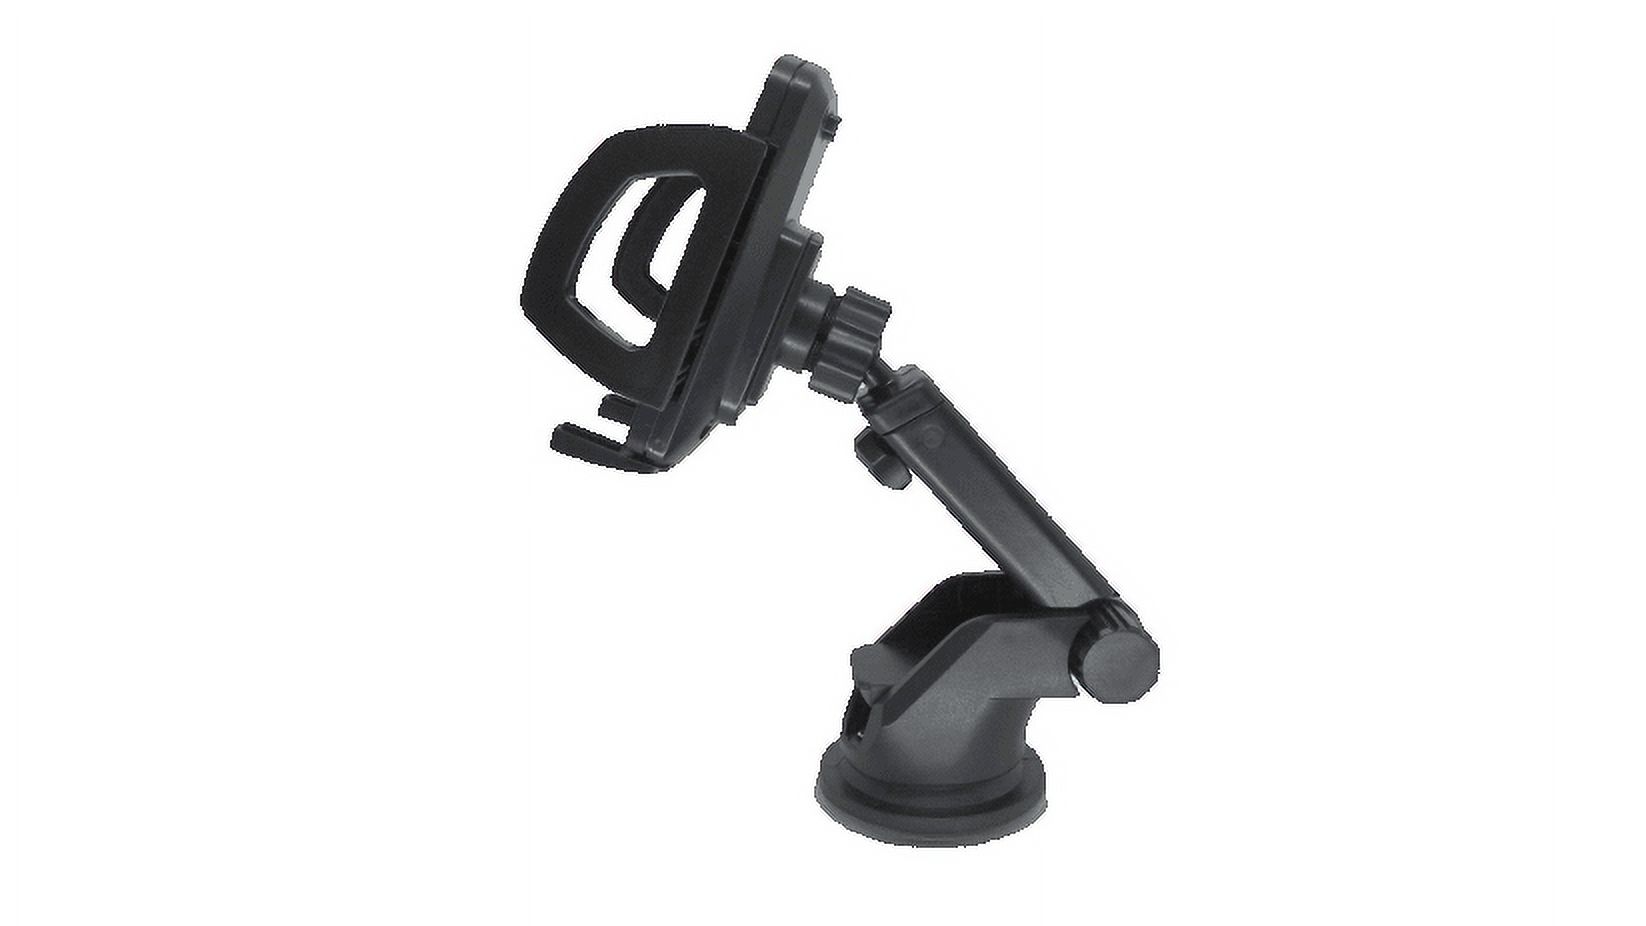 Can-Am Universal Vehicle Dash & Windshield Mount - Black. Car mount, truck mount, vehicle mount, cell phone car mount, car cradle, car cell phone holder - image 3 of 4